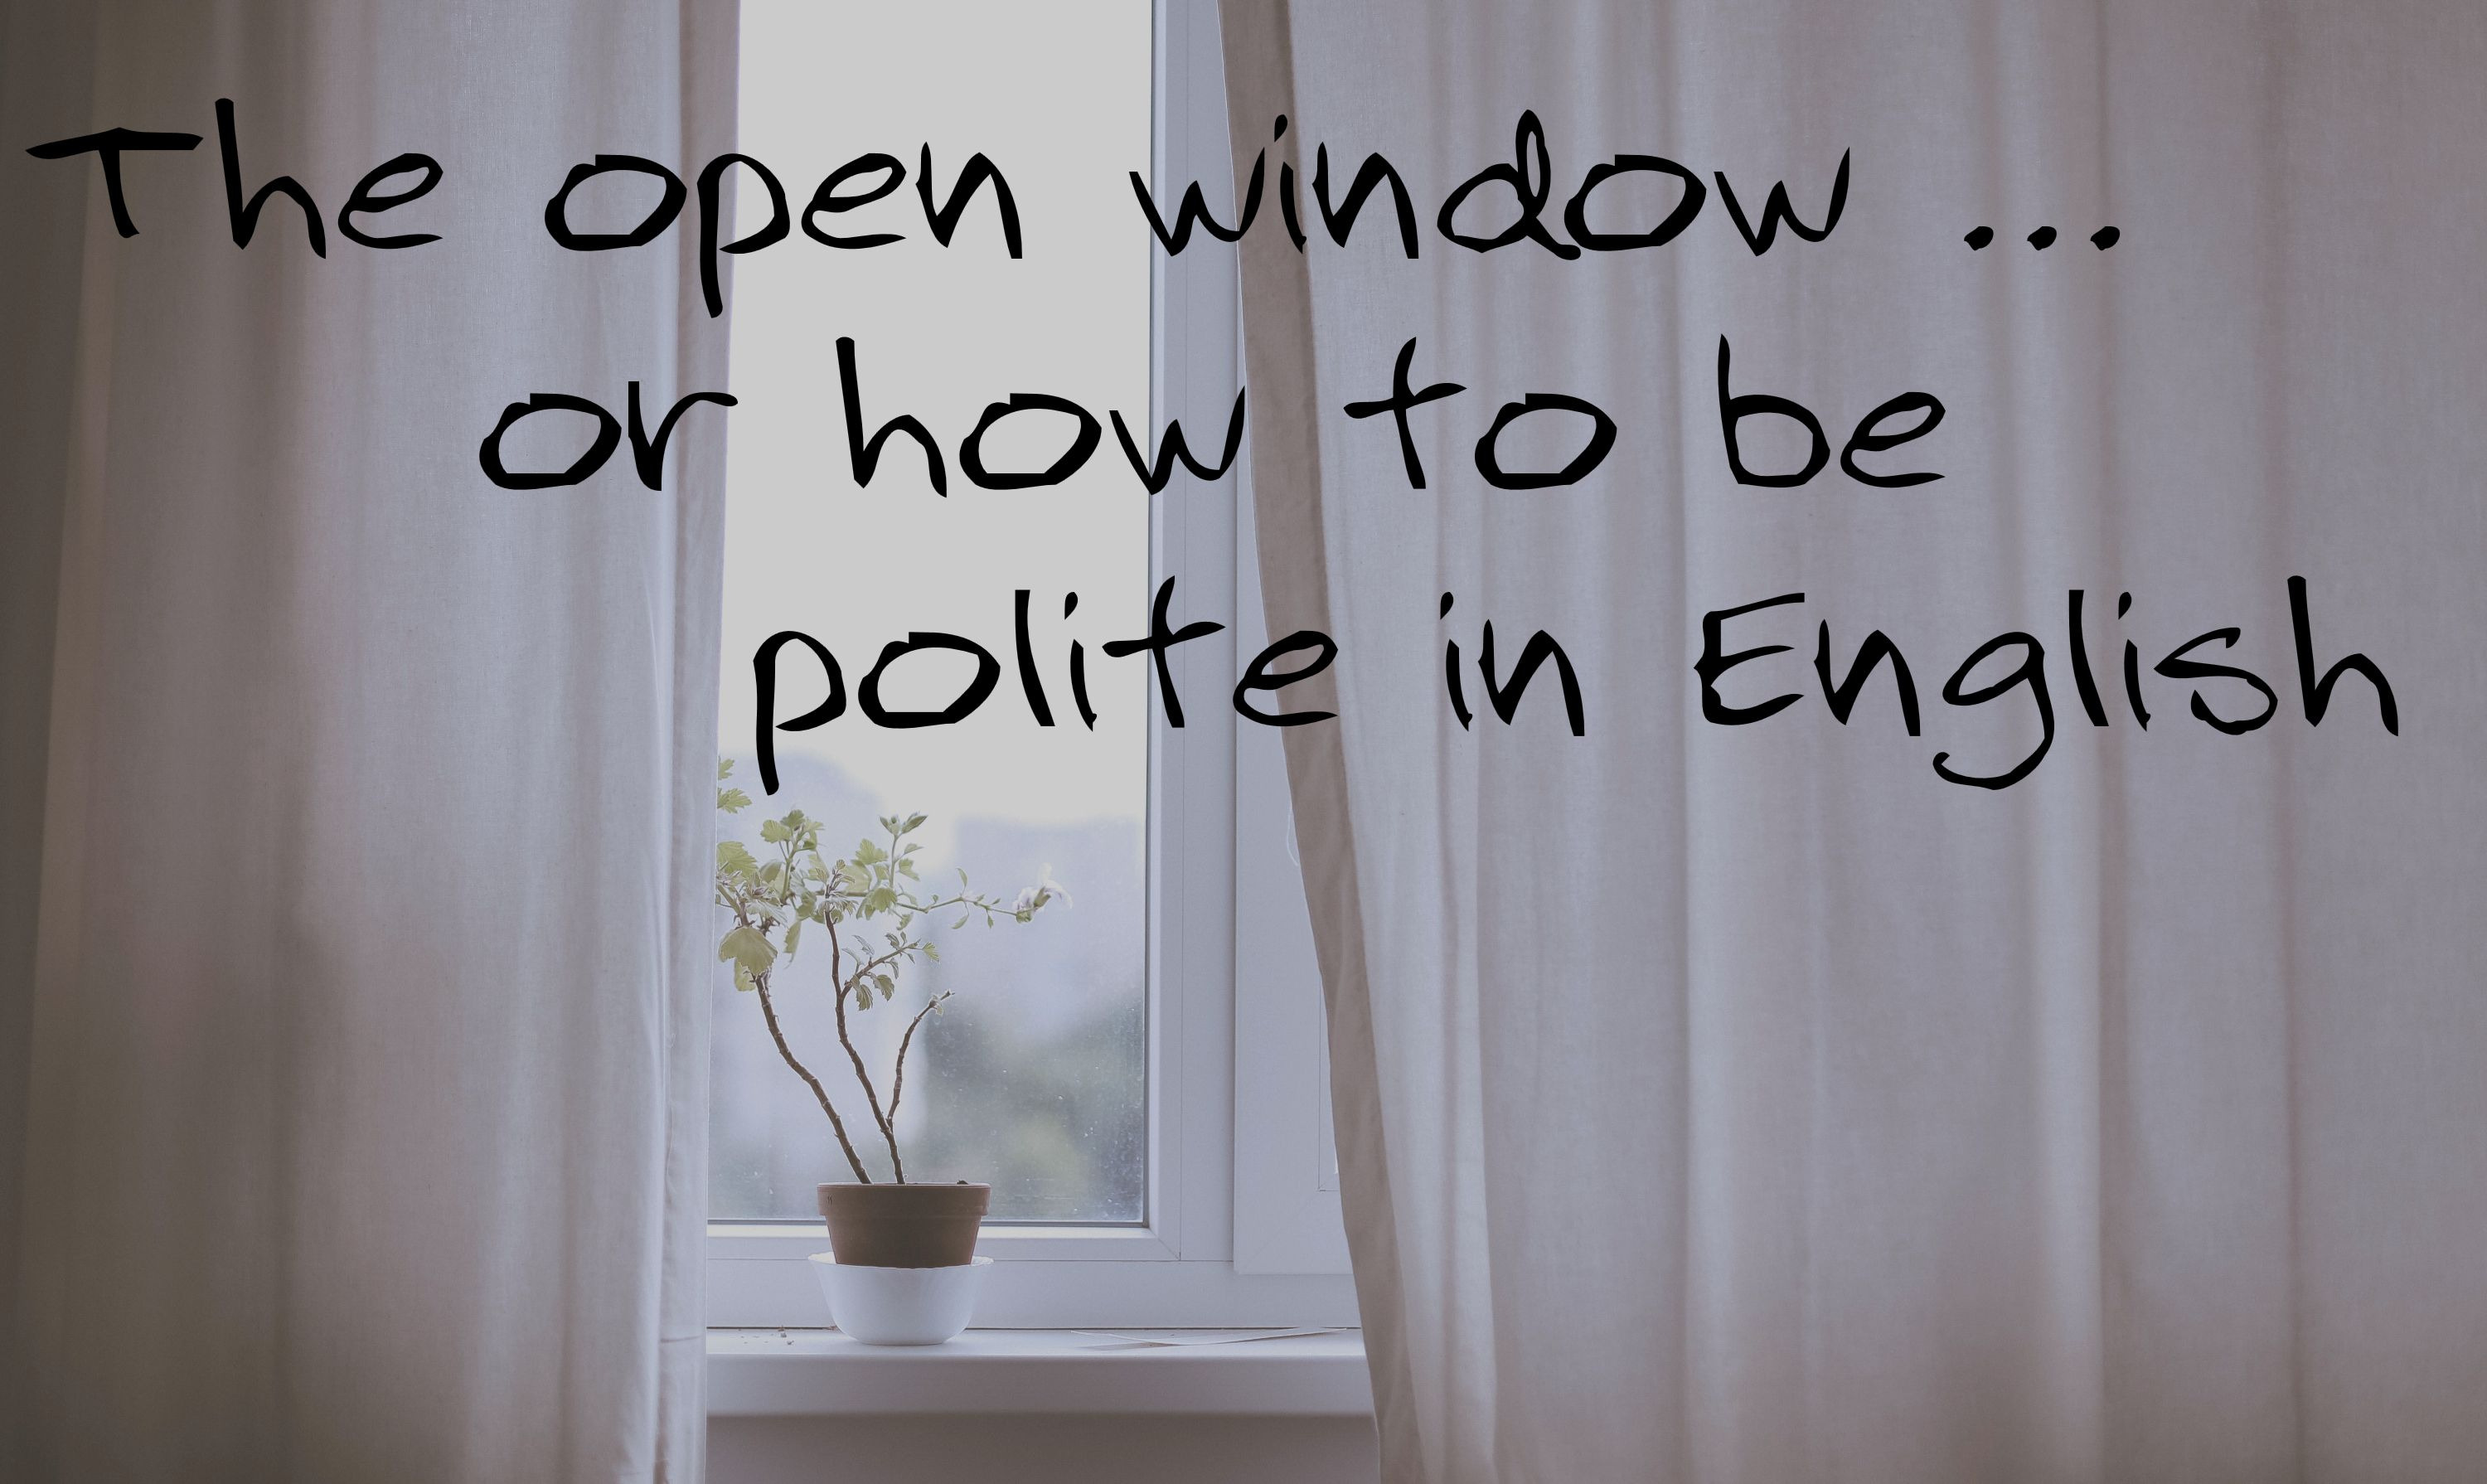 The open window … or how to be polite in English